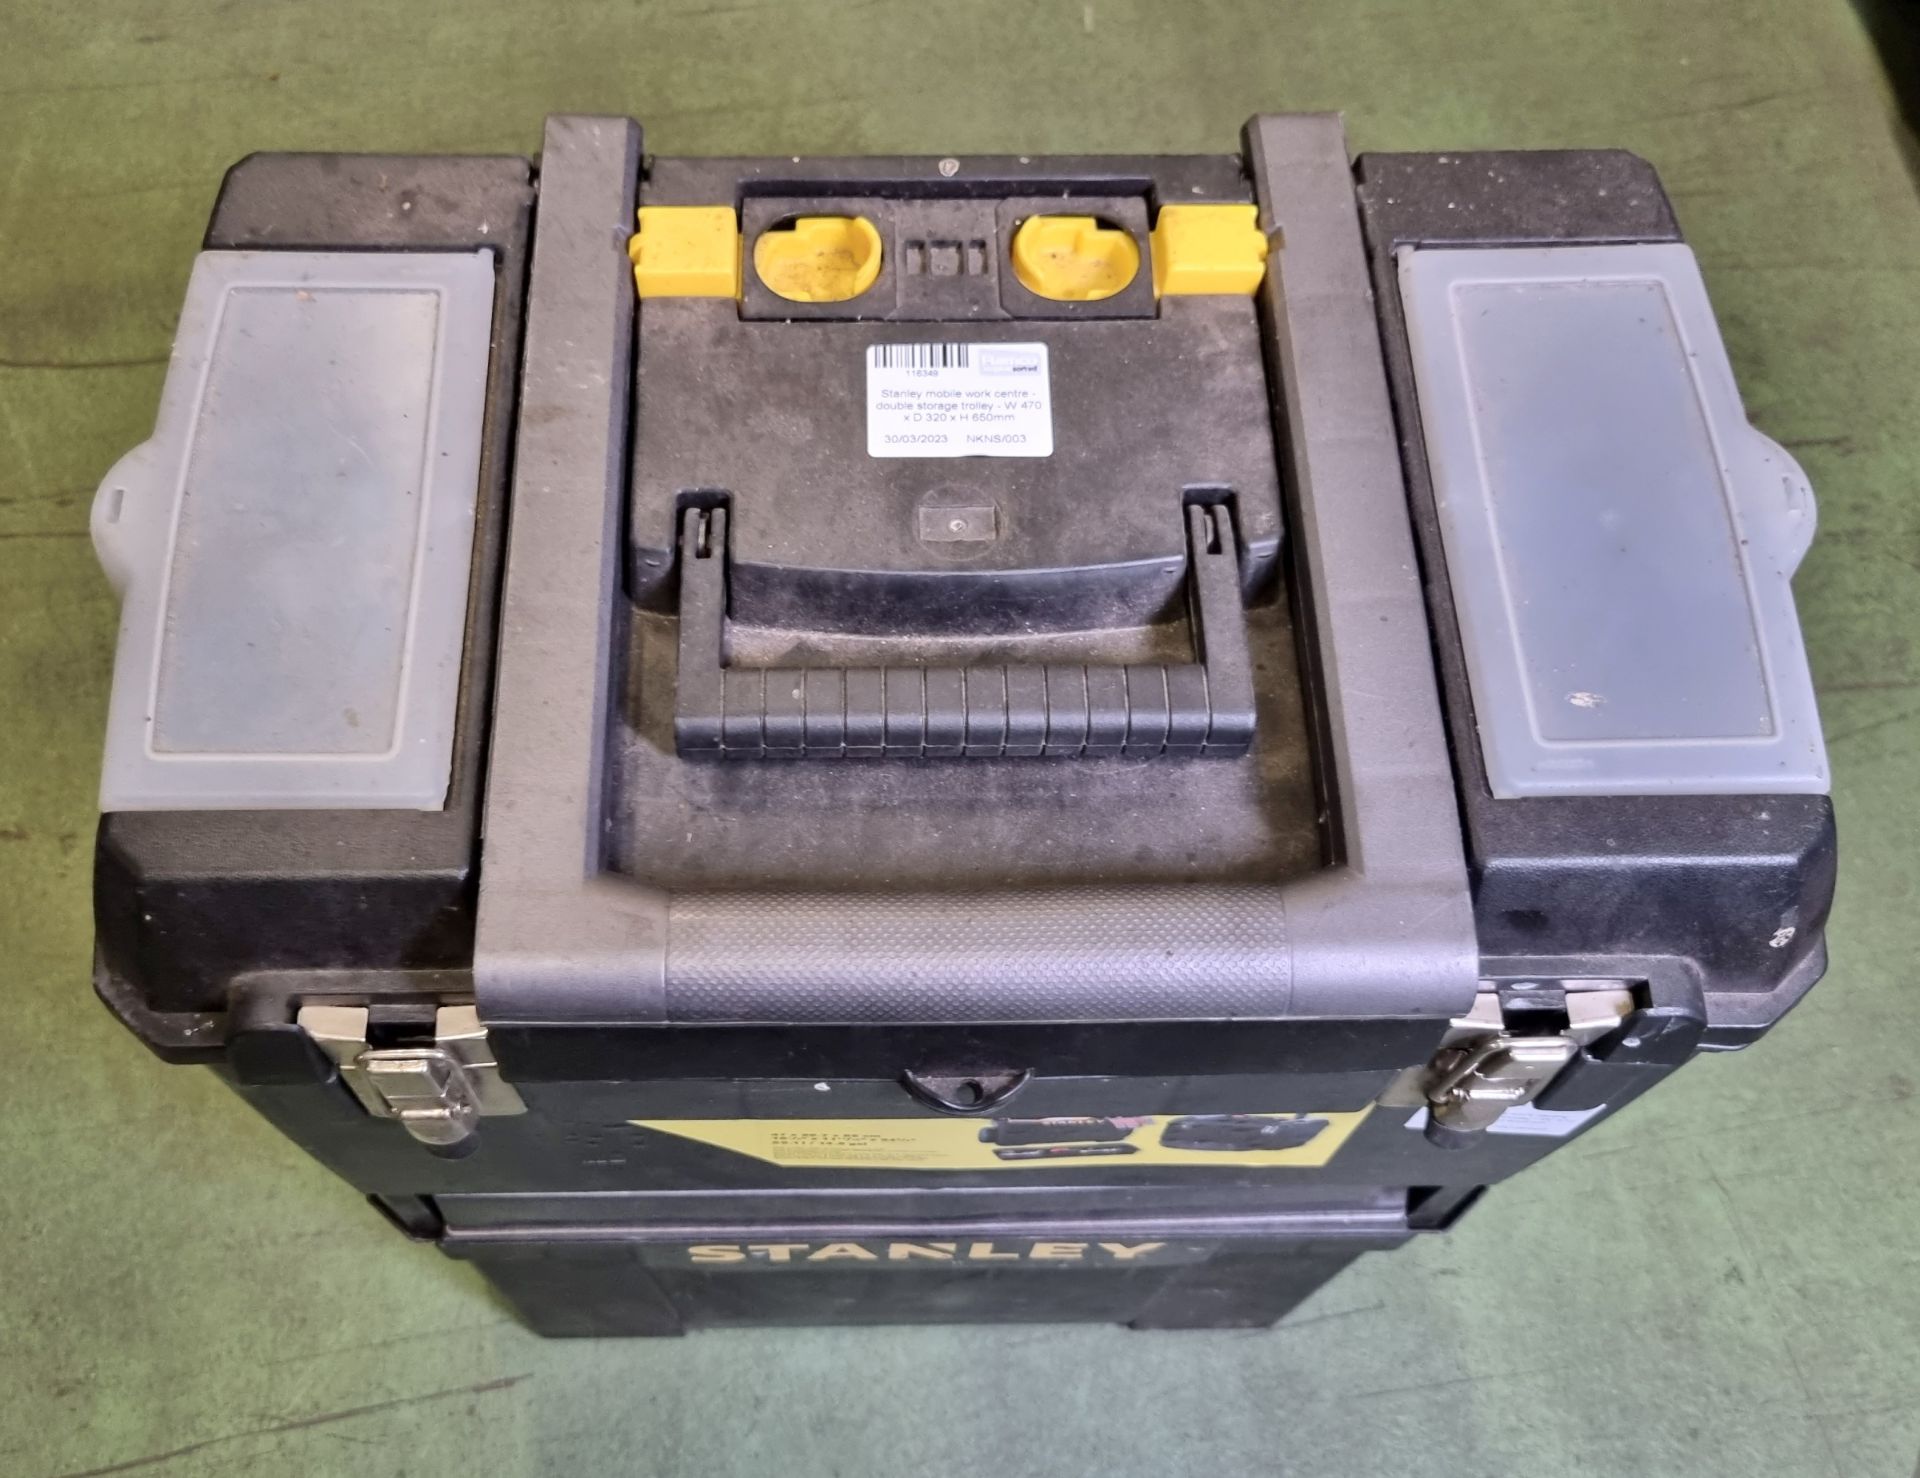 Stanley mobile work centre - double storage trolley - W 470 x D 320 x H 650mm - Image 2 of 6